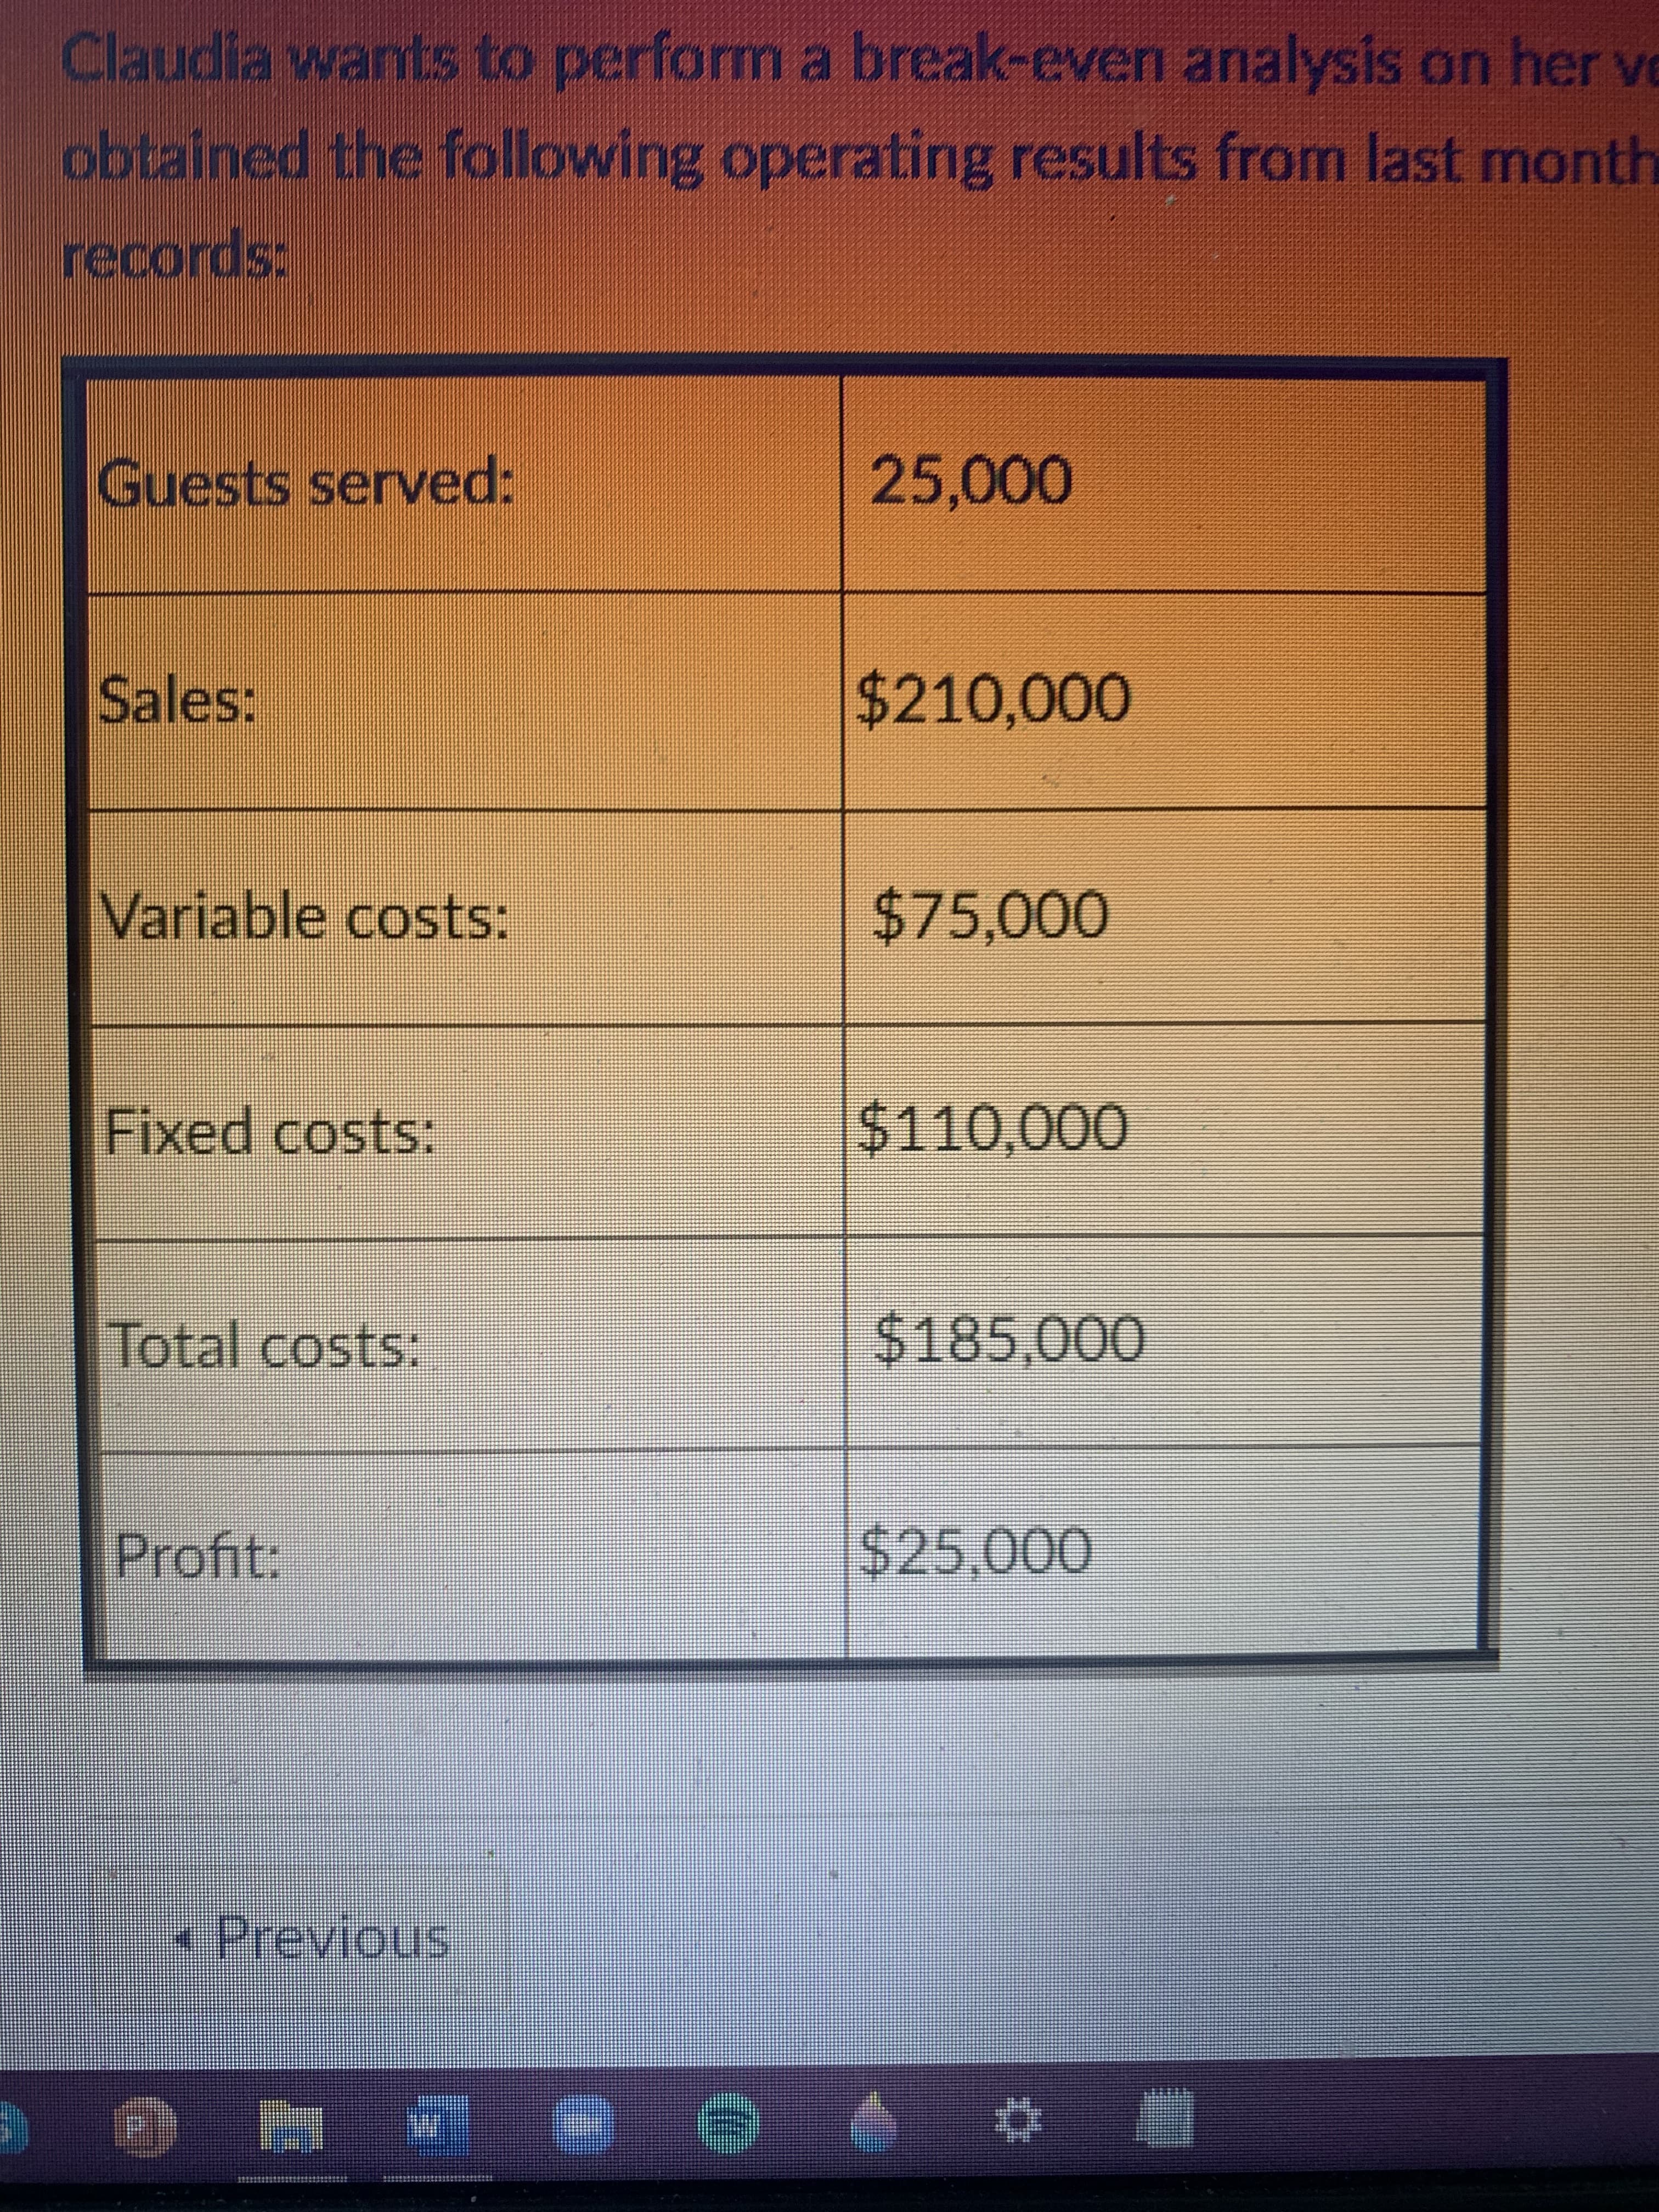 Claudia wants to perform a break-even analysis on her ve
obtained the following operating results from last month
records:
Guests served:
25.
Sales:
$210,000
Variable costs:
Fixed costs:
$110,000
Total costs:
Profit:
-Previous
